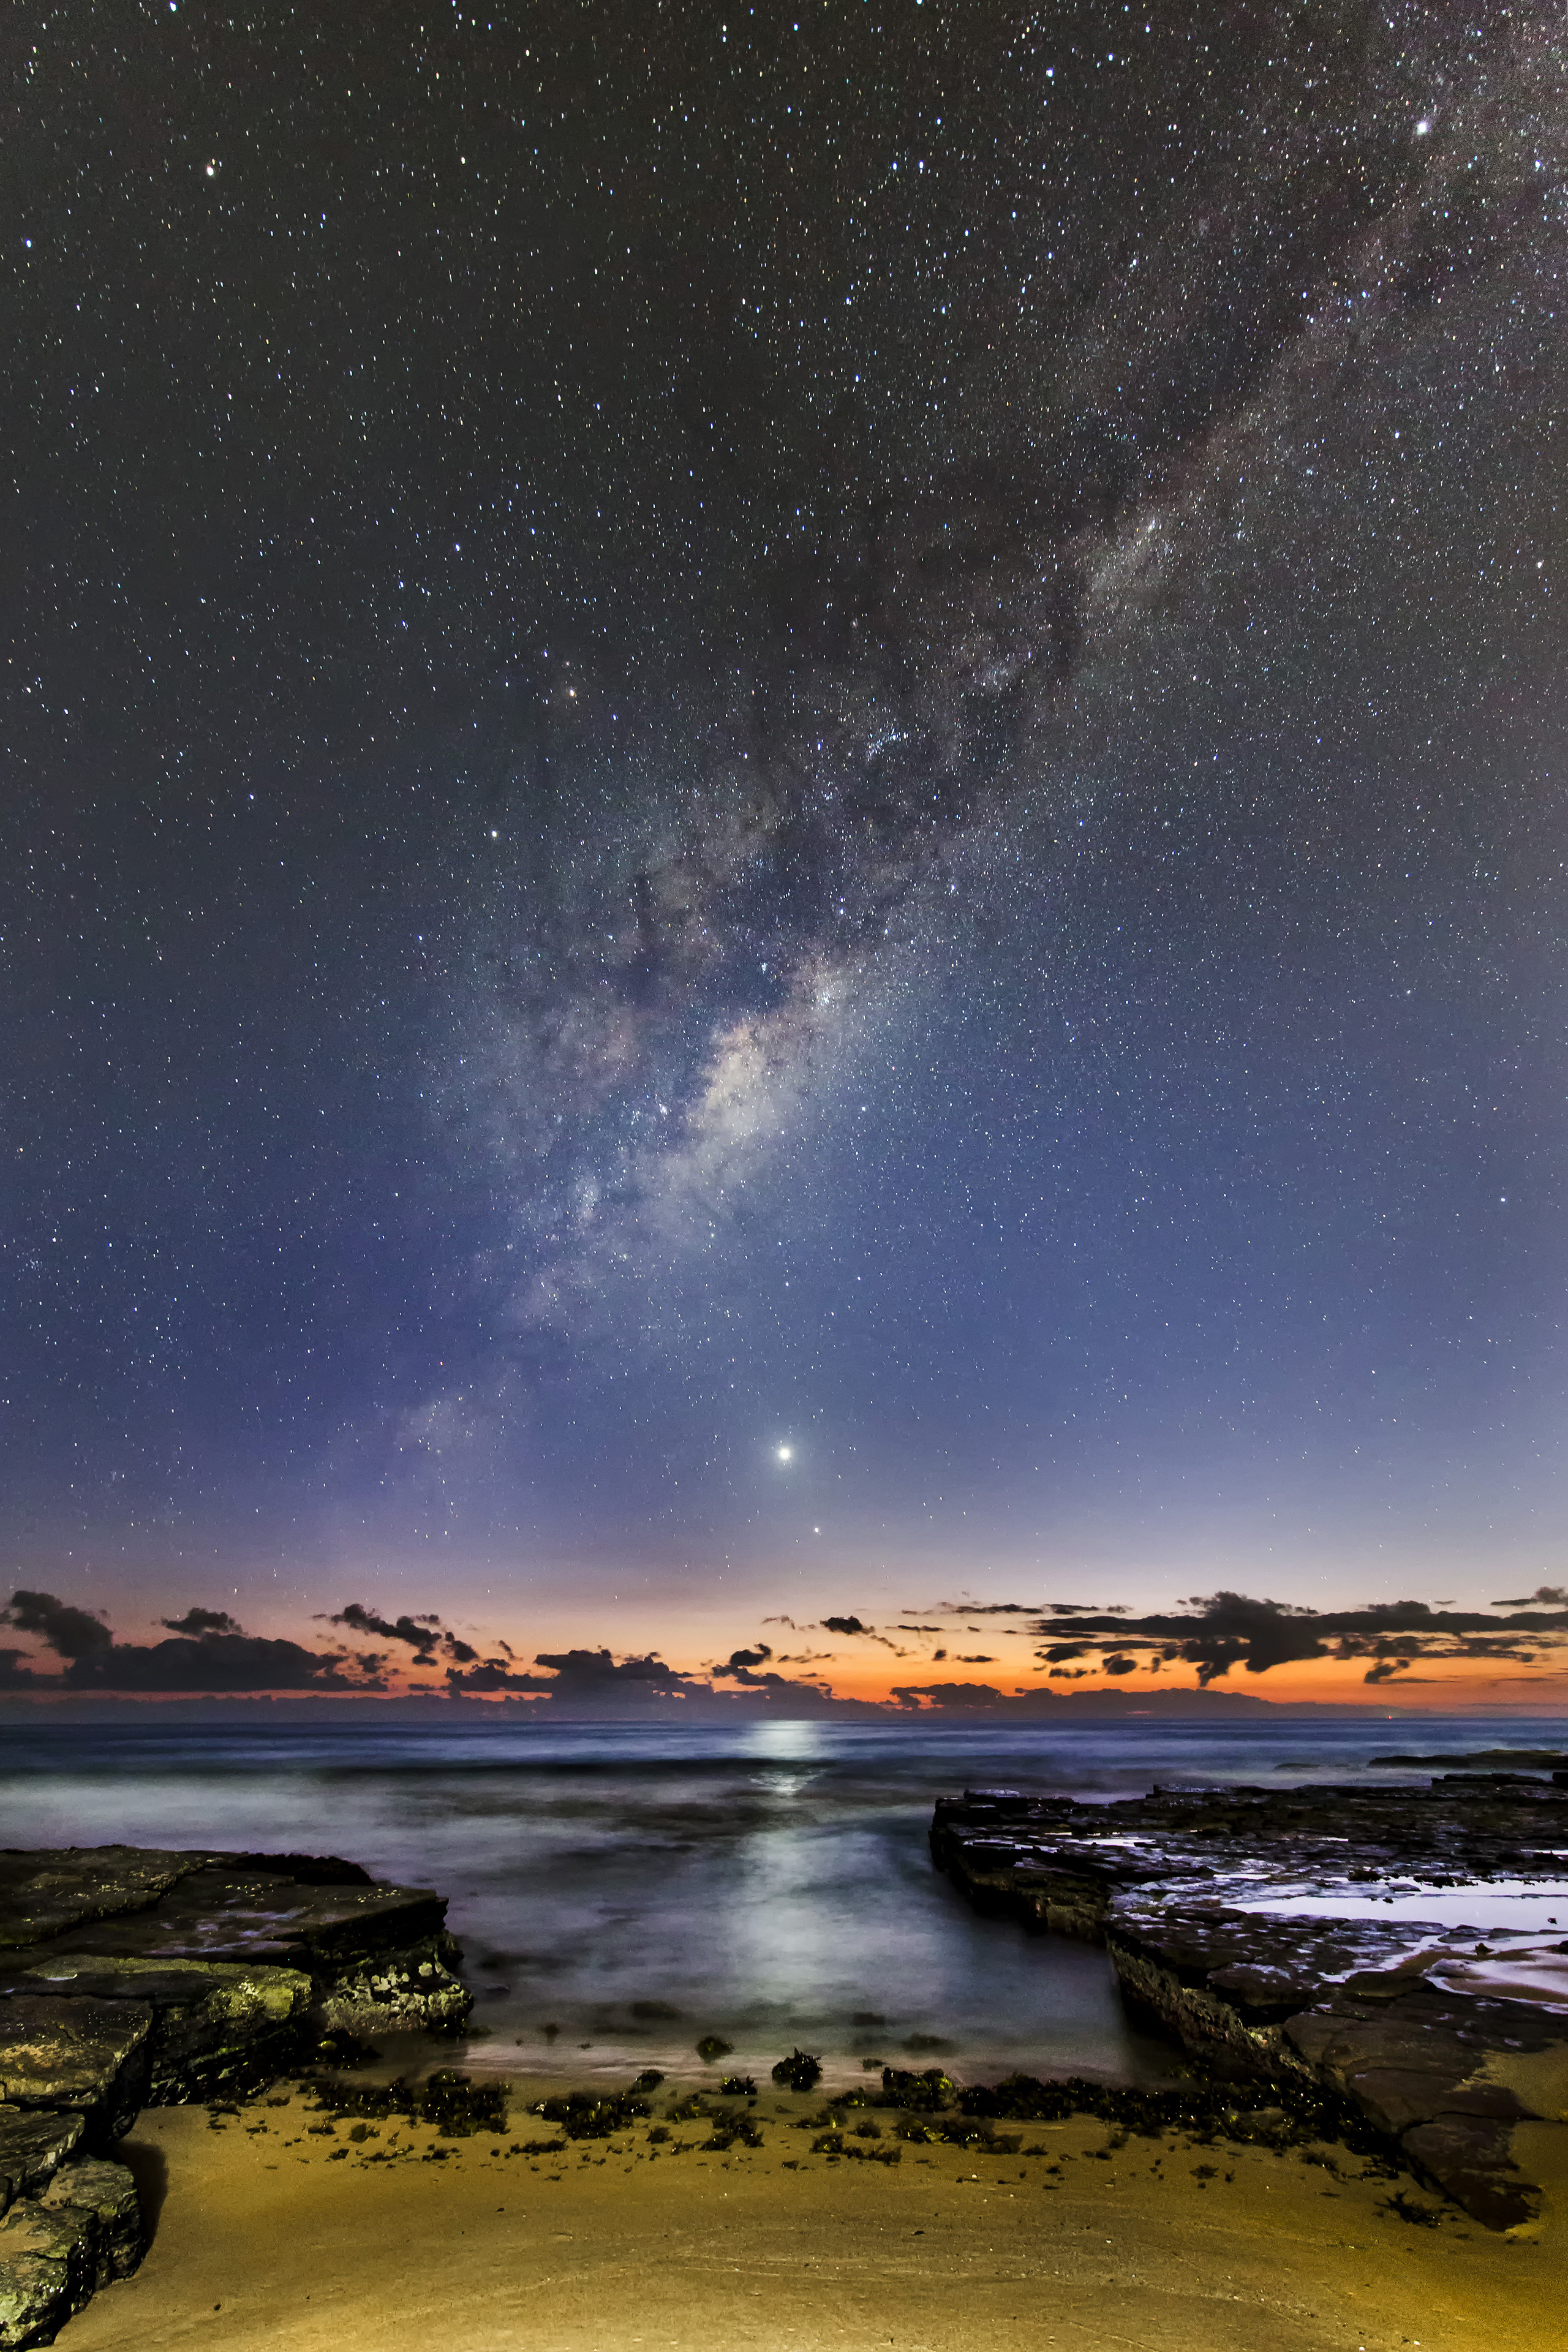 During the seldom-seen alignment of the five planets in Feb. 2016, Venus, Mercury and the Milky Way rose an hour before sunrise, and appear to be fleeing its early glow, overlooking Turrimeta Beach, Australia.